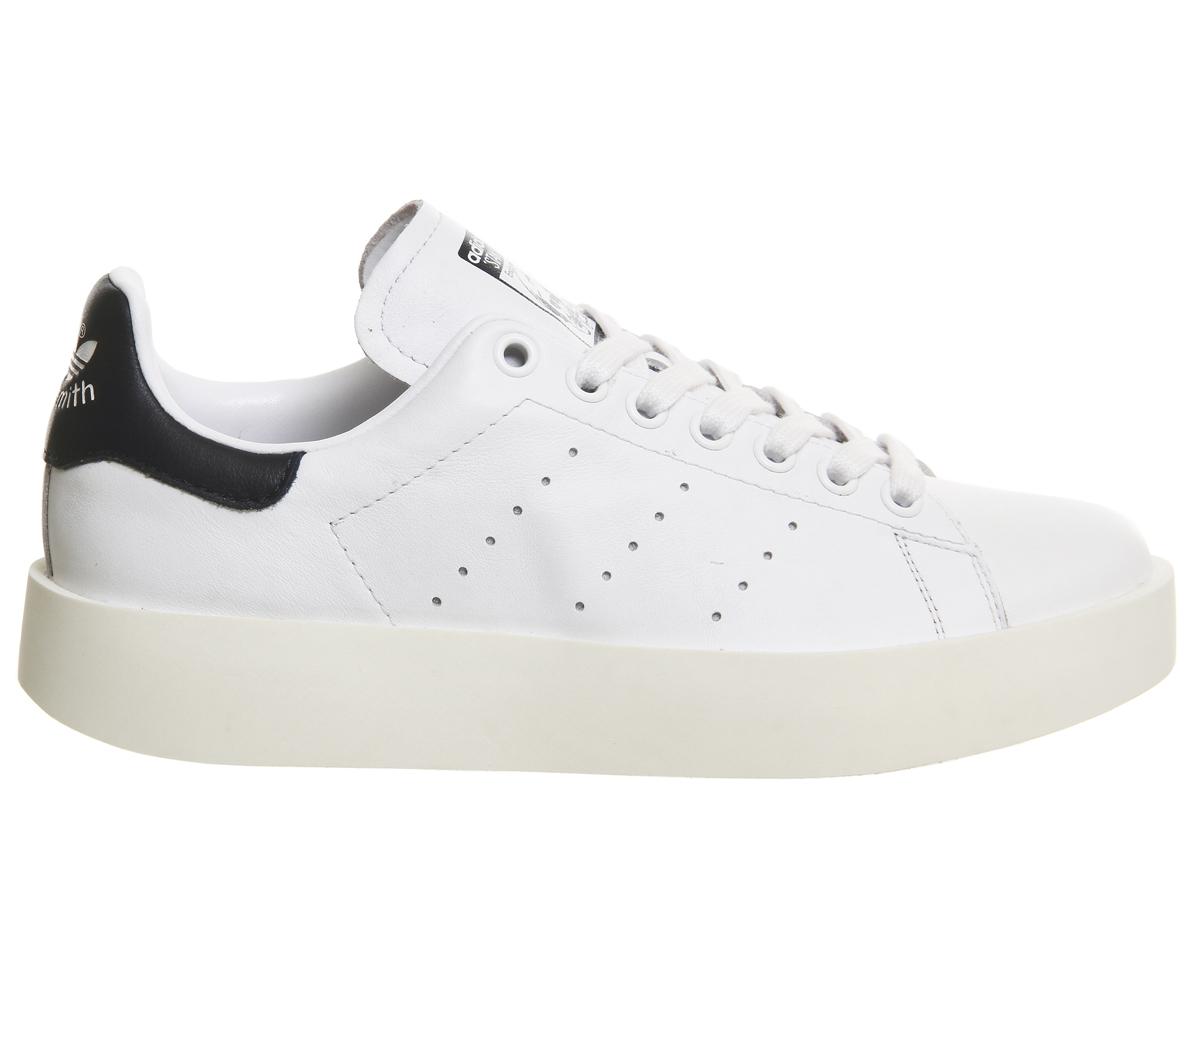 adidas Originals Leather Stan Smith Bold in White for Men - Lyst